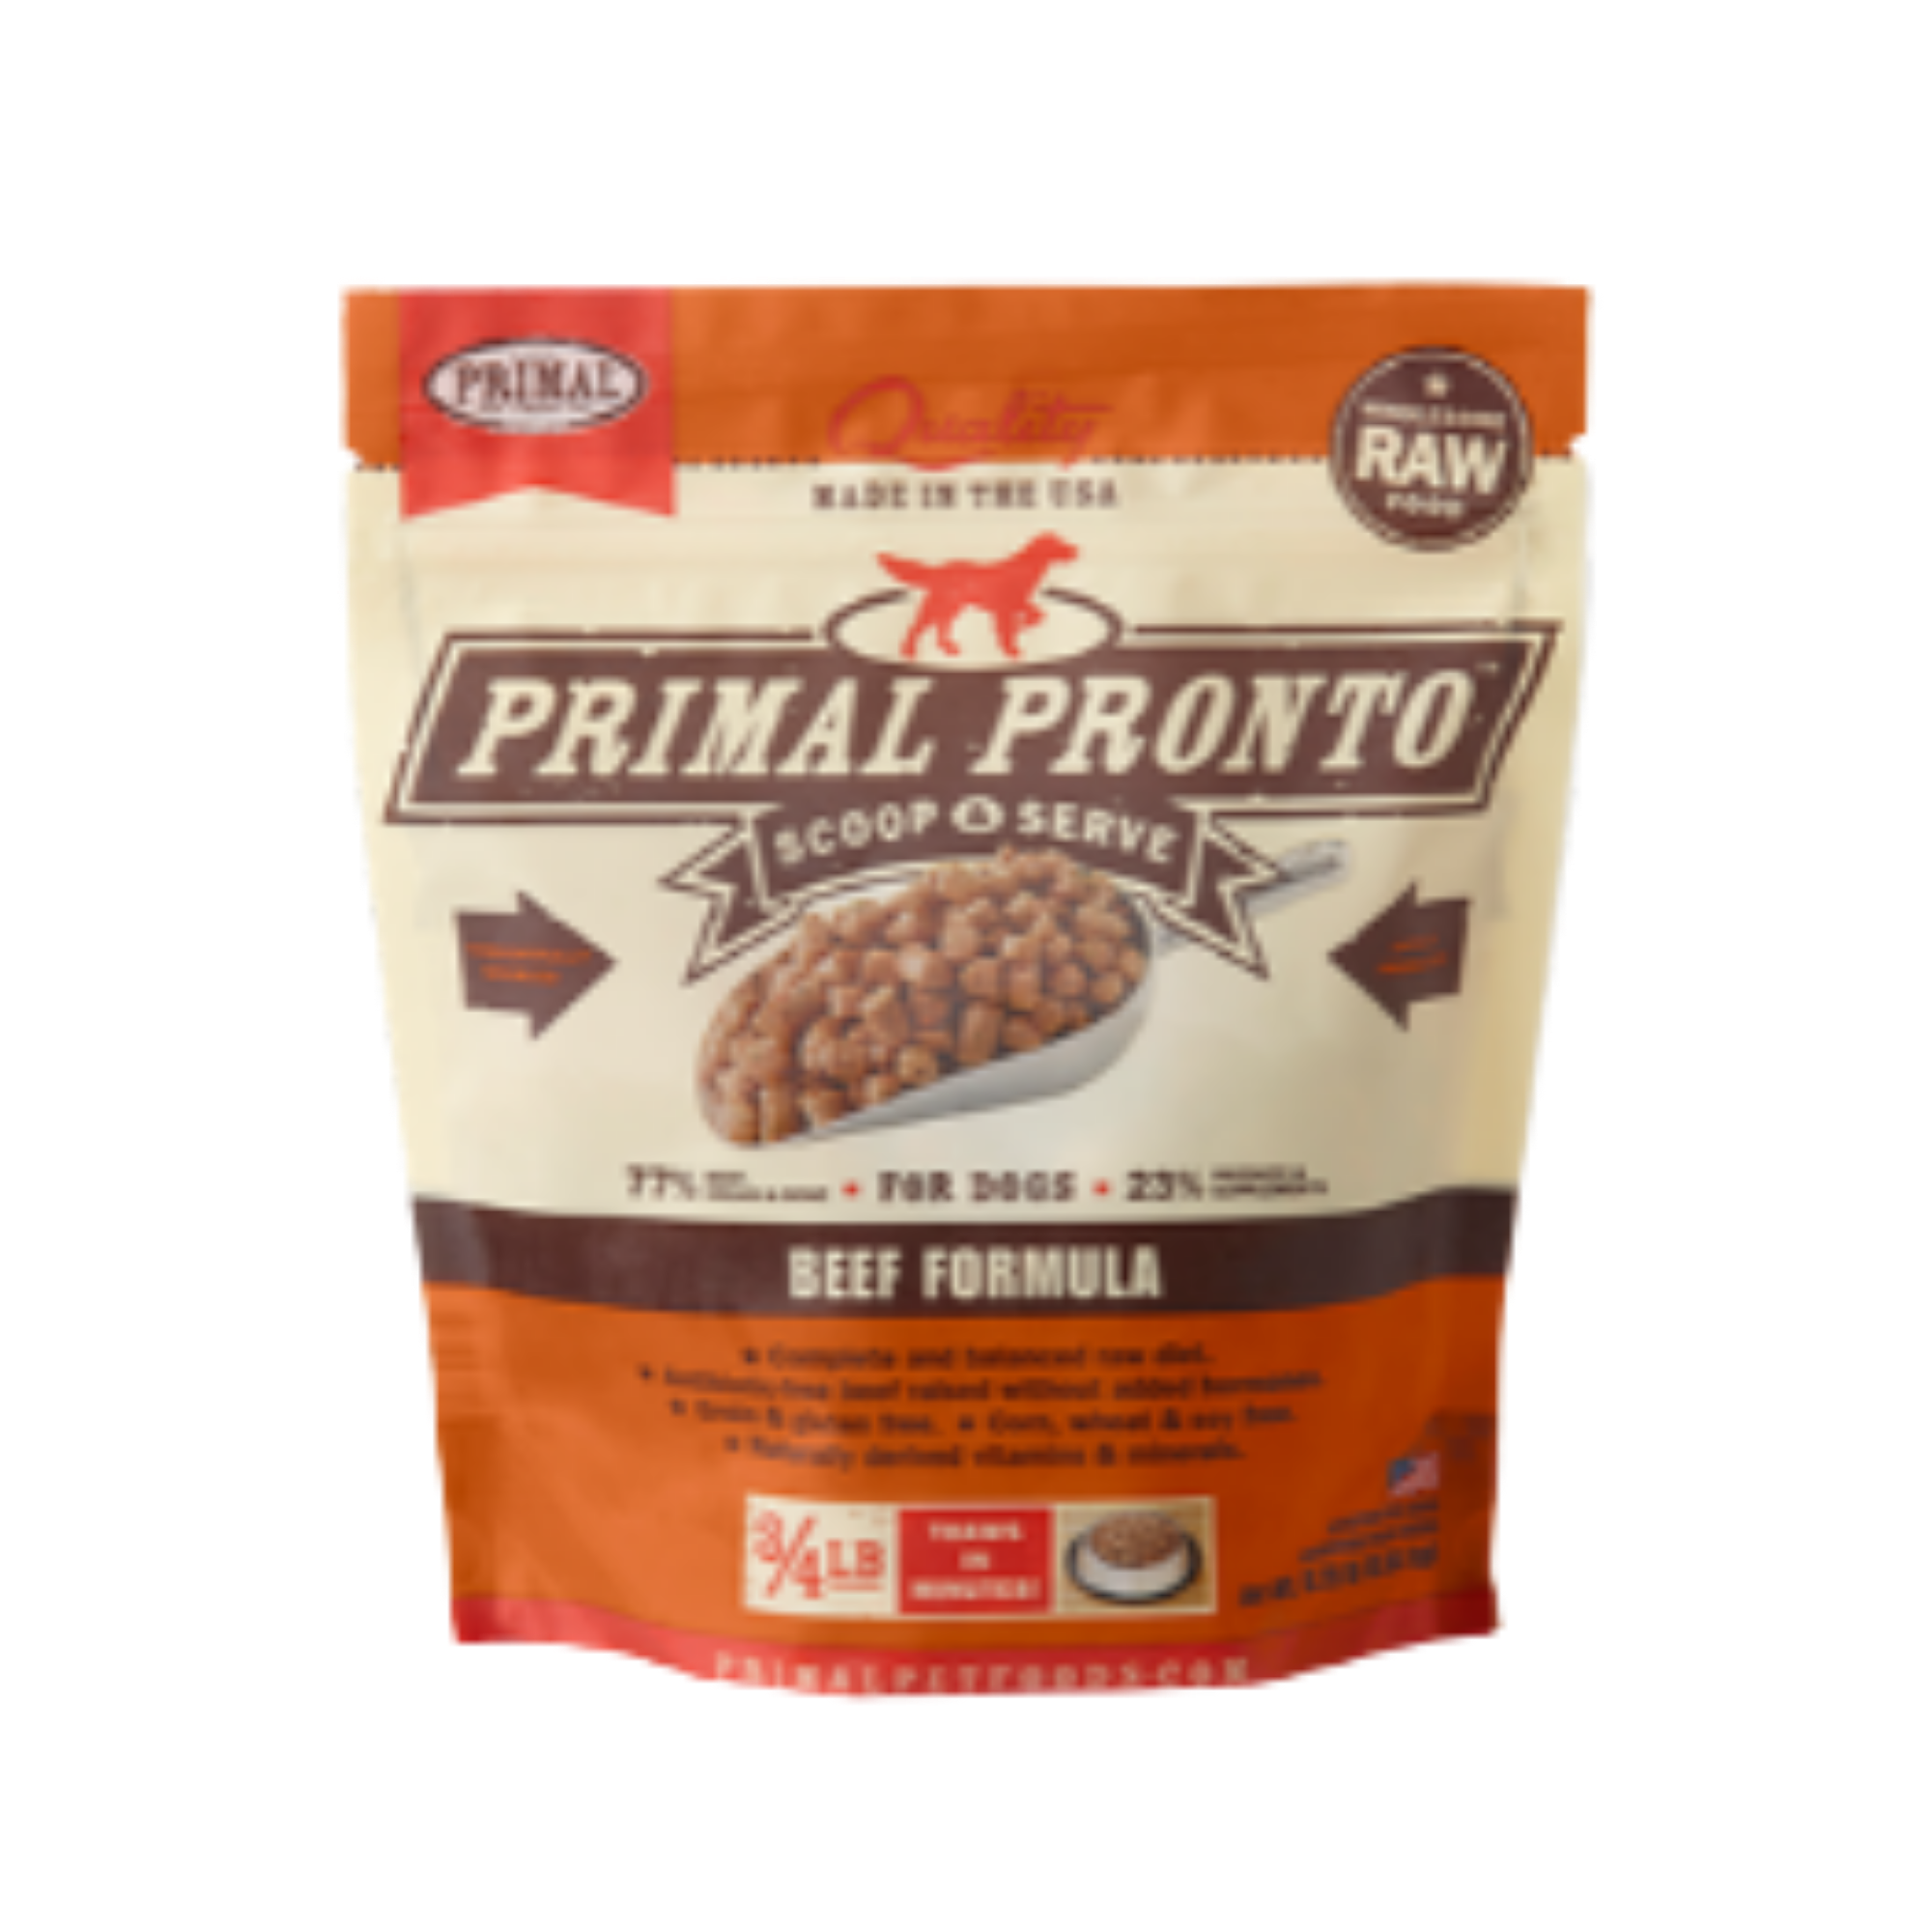 Primal Pronto Trial Size Beef Formula Raw Frozen Dog Food 12oz - Mutts & Co.